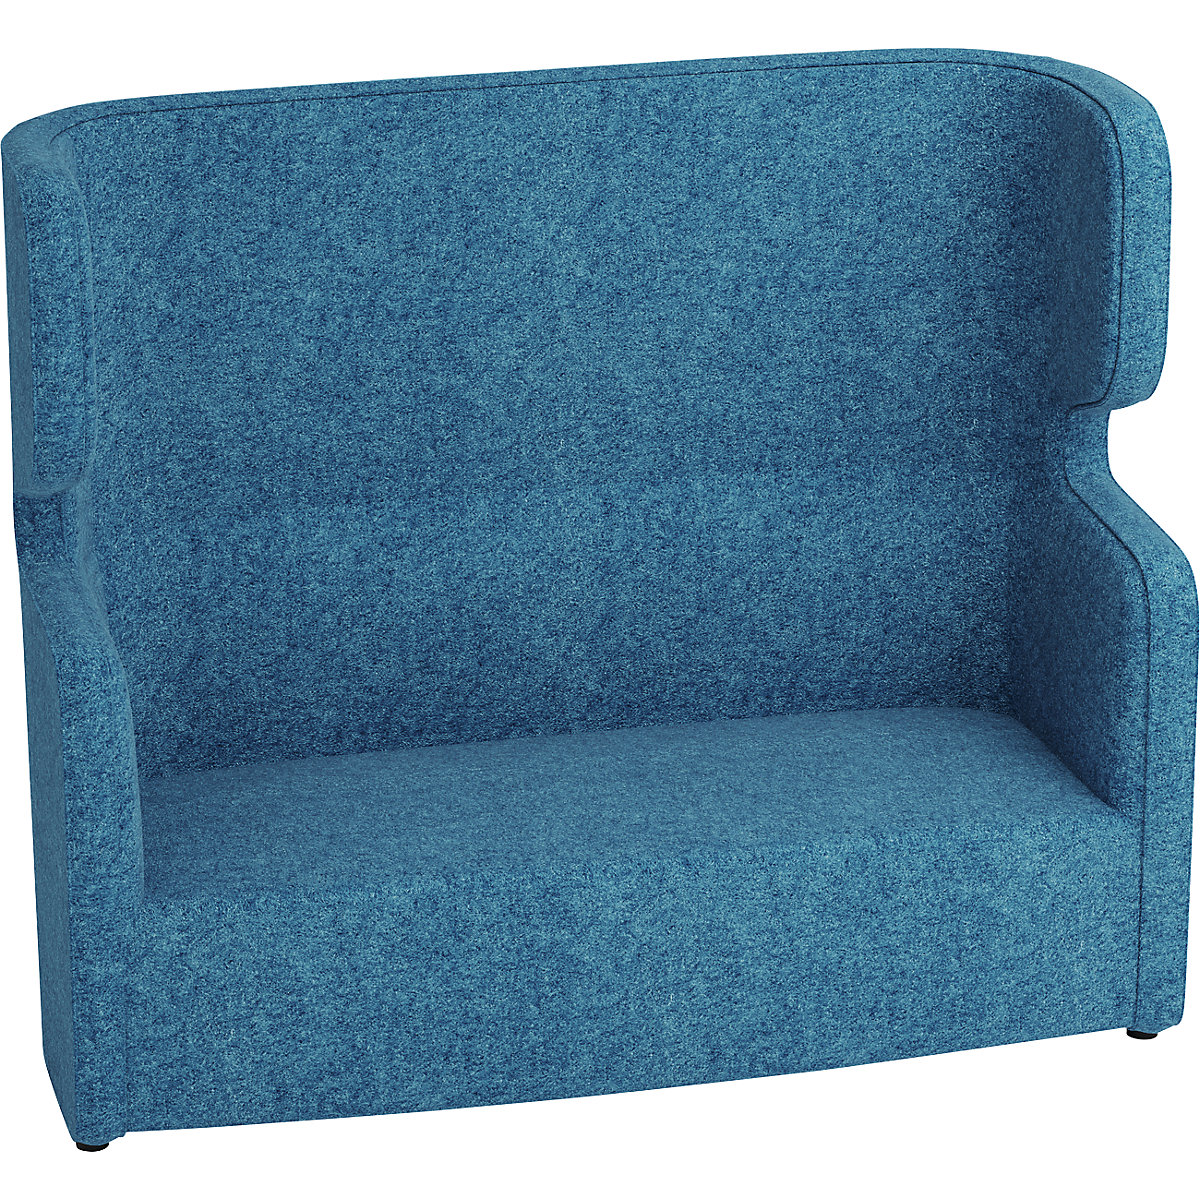 VIVO acoustic sofa – BISLEY, two-seater with high back rest, blue